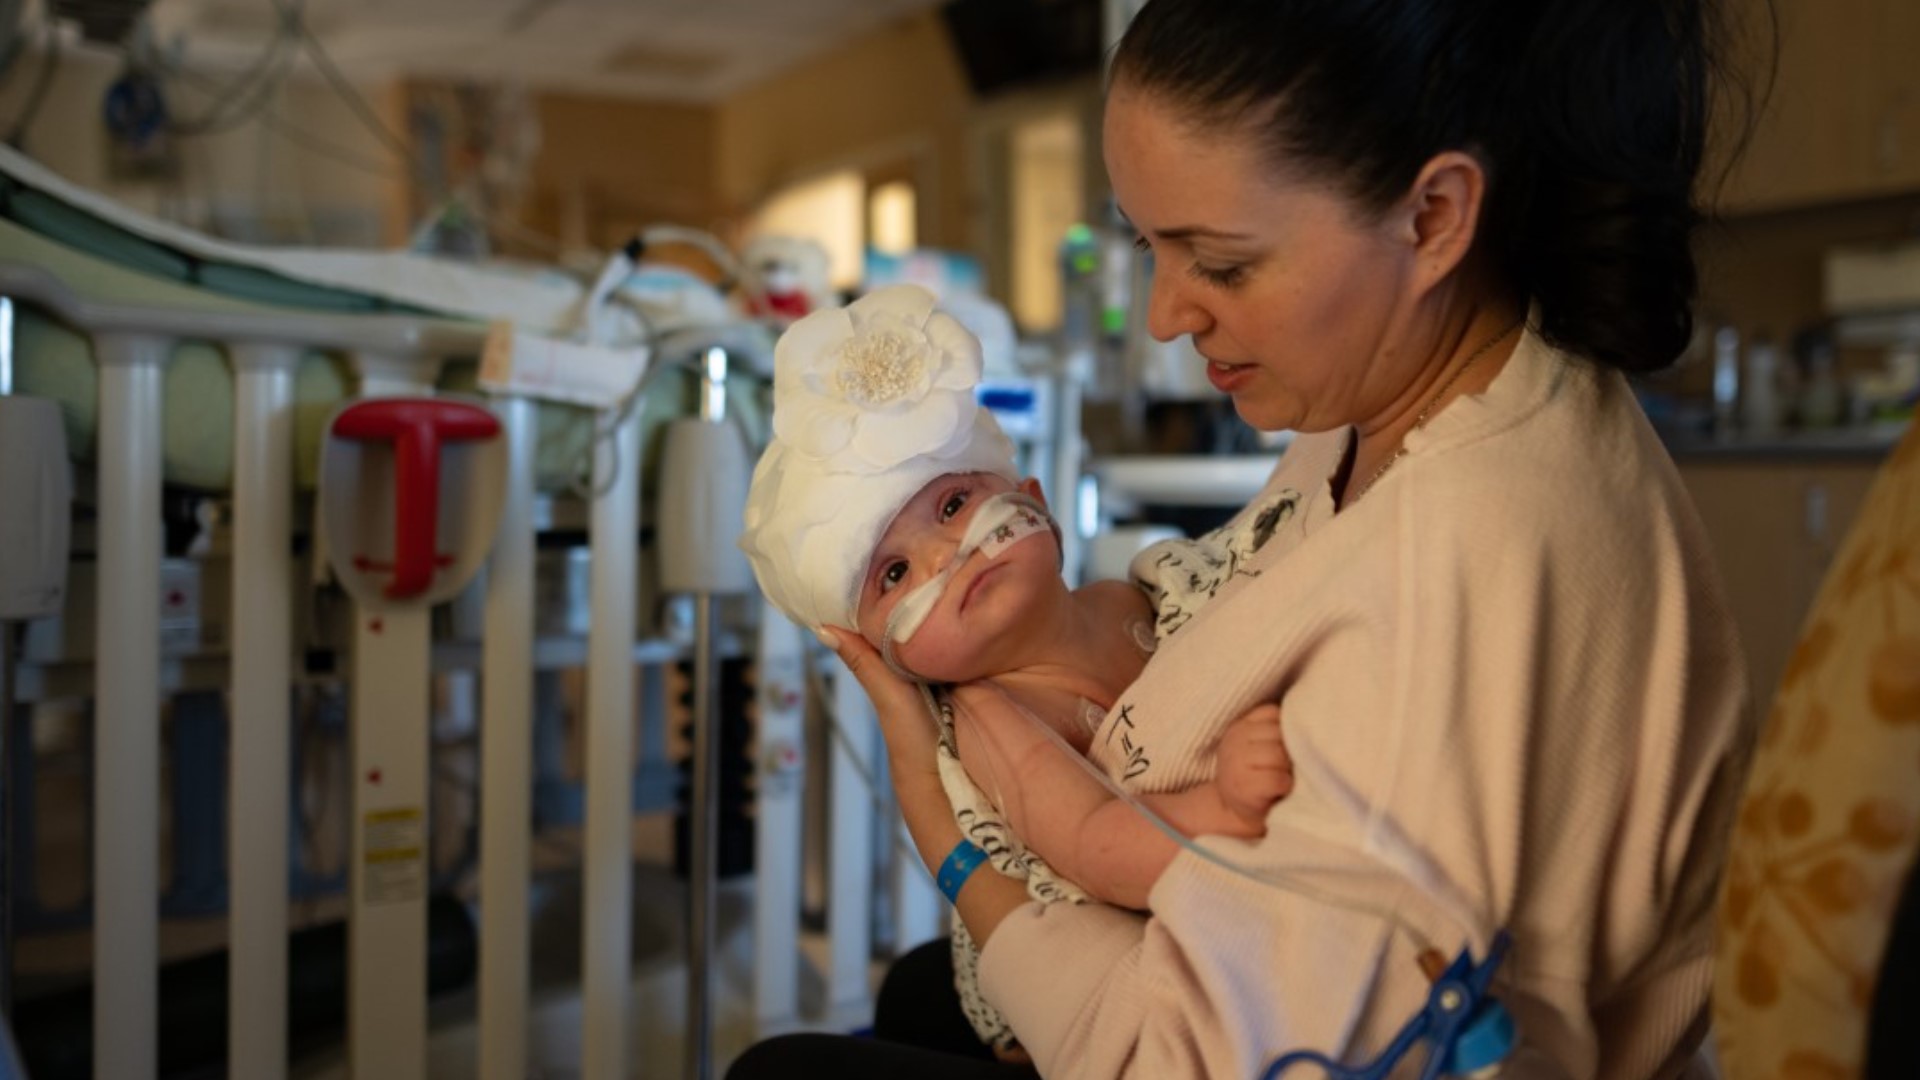 Abigail and Micaela Bachinskiy were the first conjoined twins to be successfully separated at the UC Davis Medical Center.